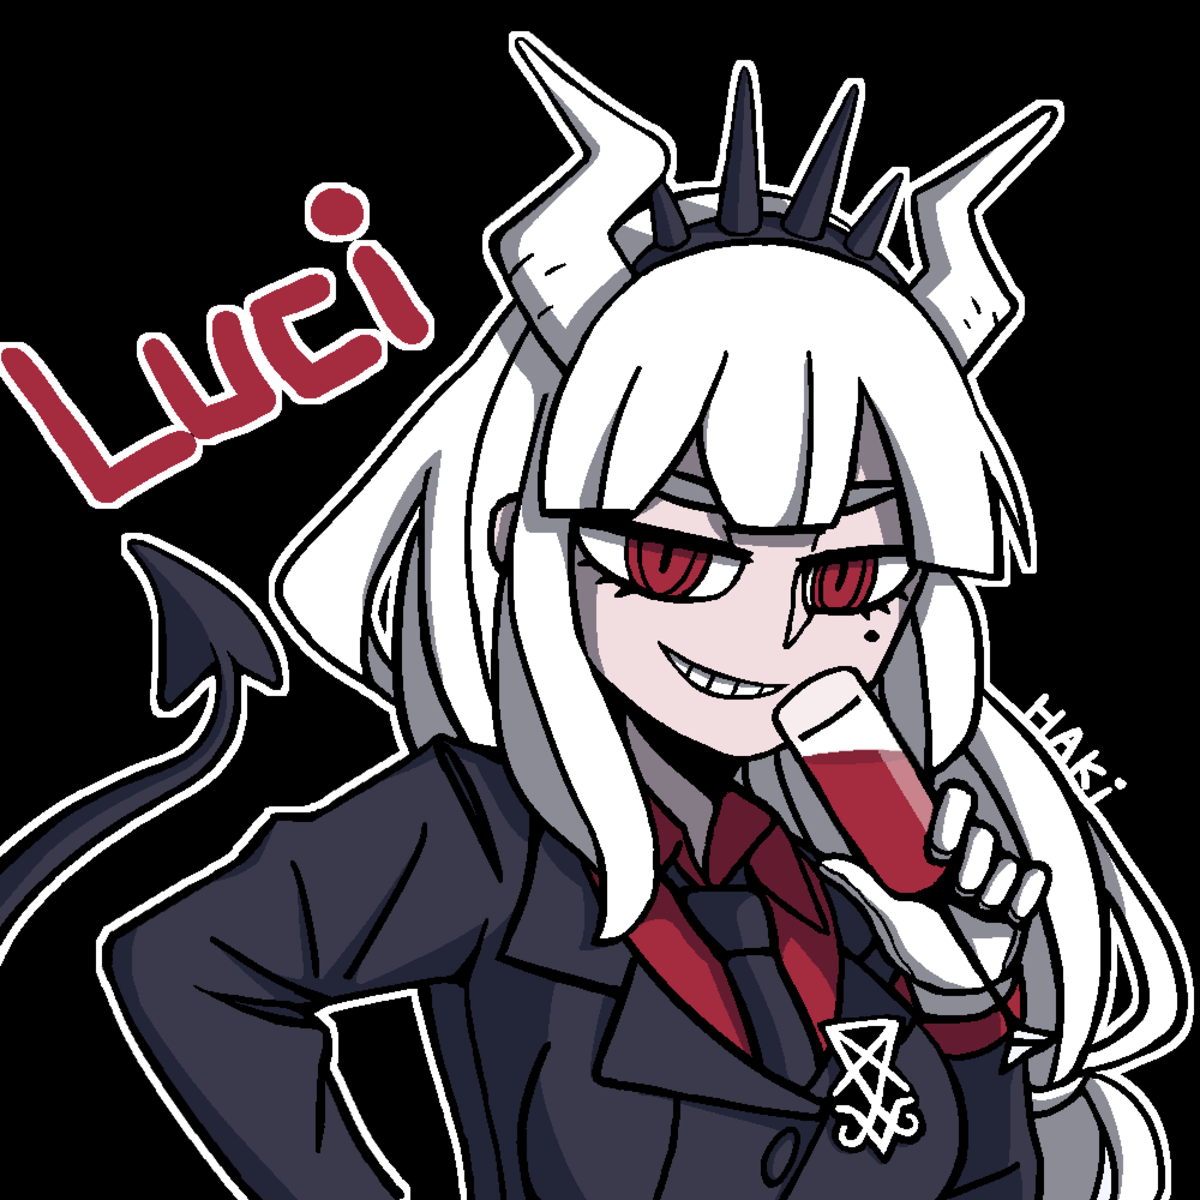 Daily Demon Harem 7: Lucifer!. Hope your weekend is going well! Source: join list: DailyDemonHarem (194 subs)Mention Clicks: 38148Msgs Sent: 50296Mention Histor